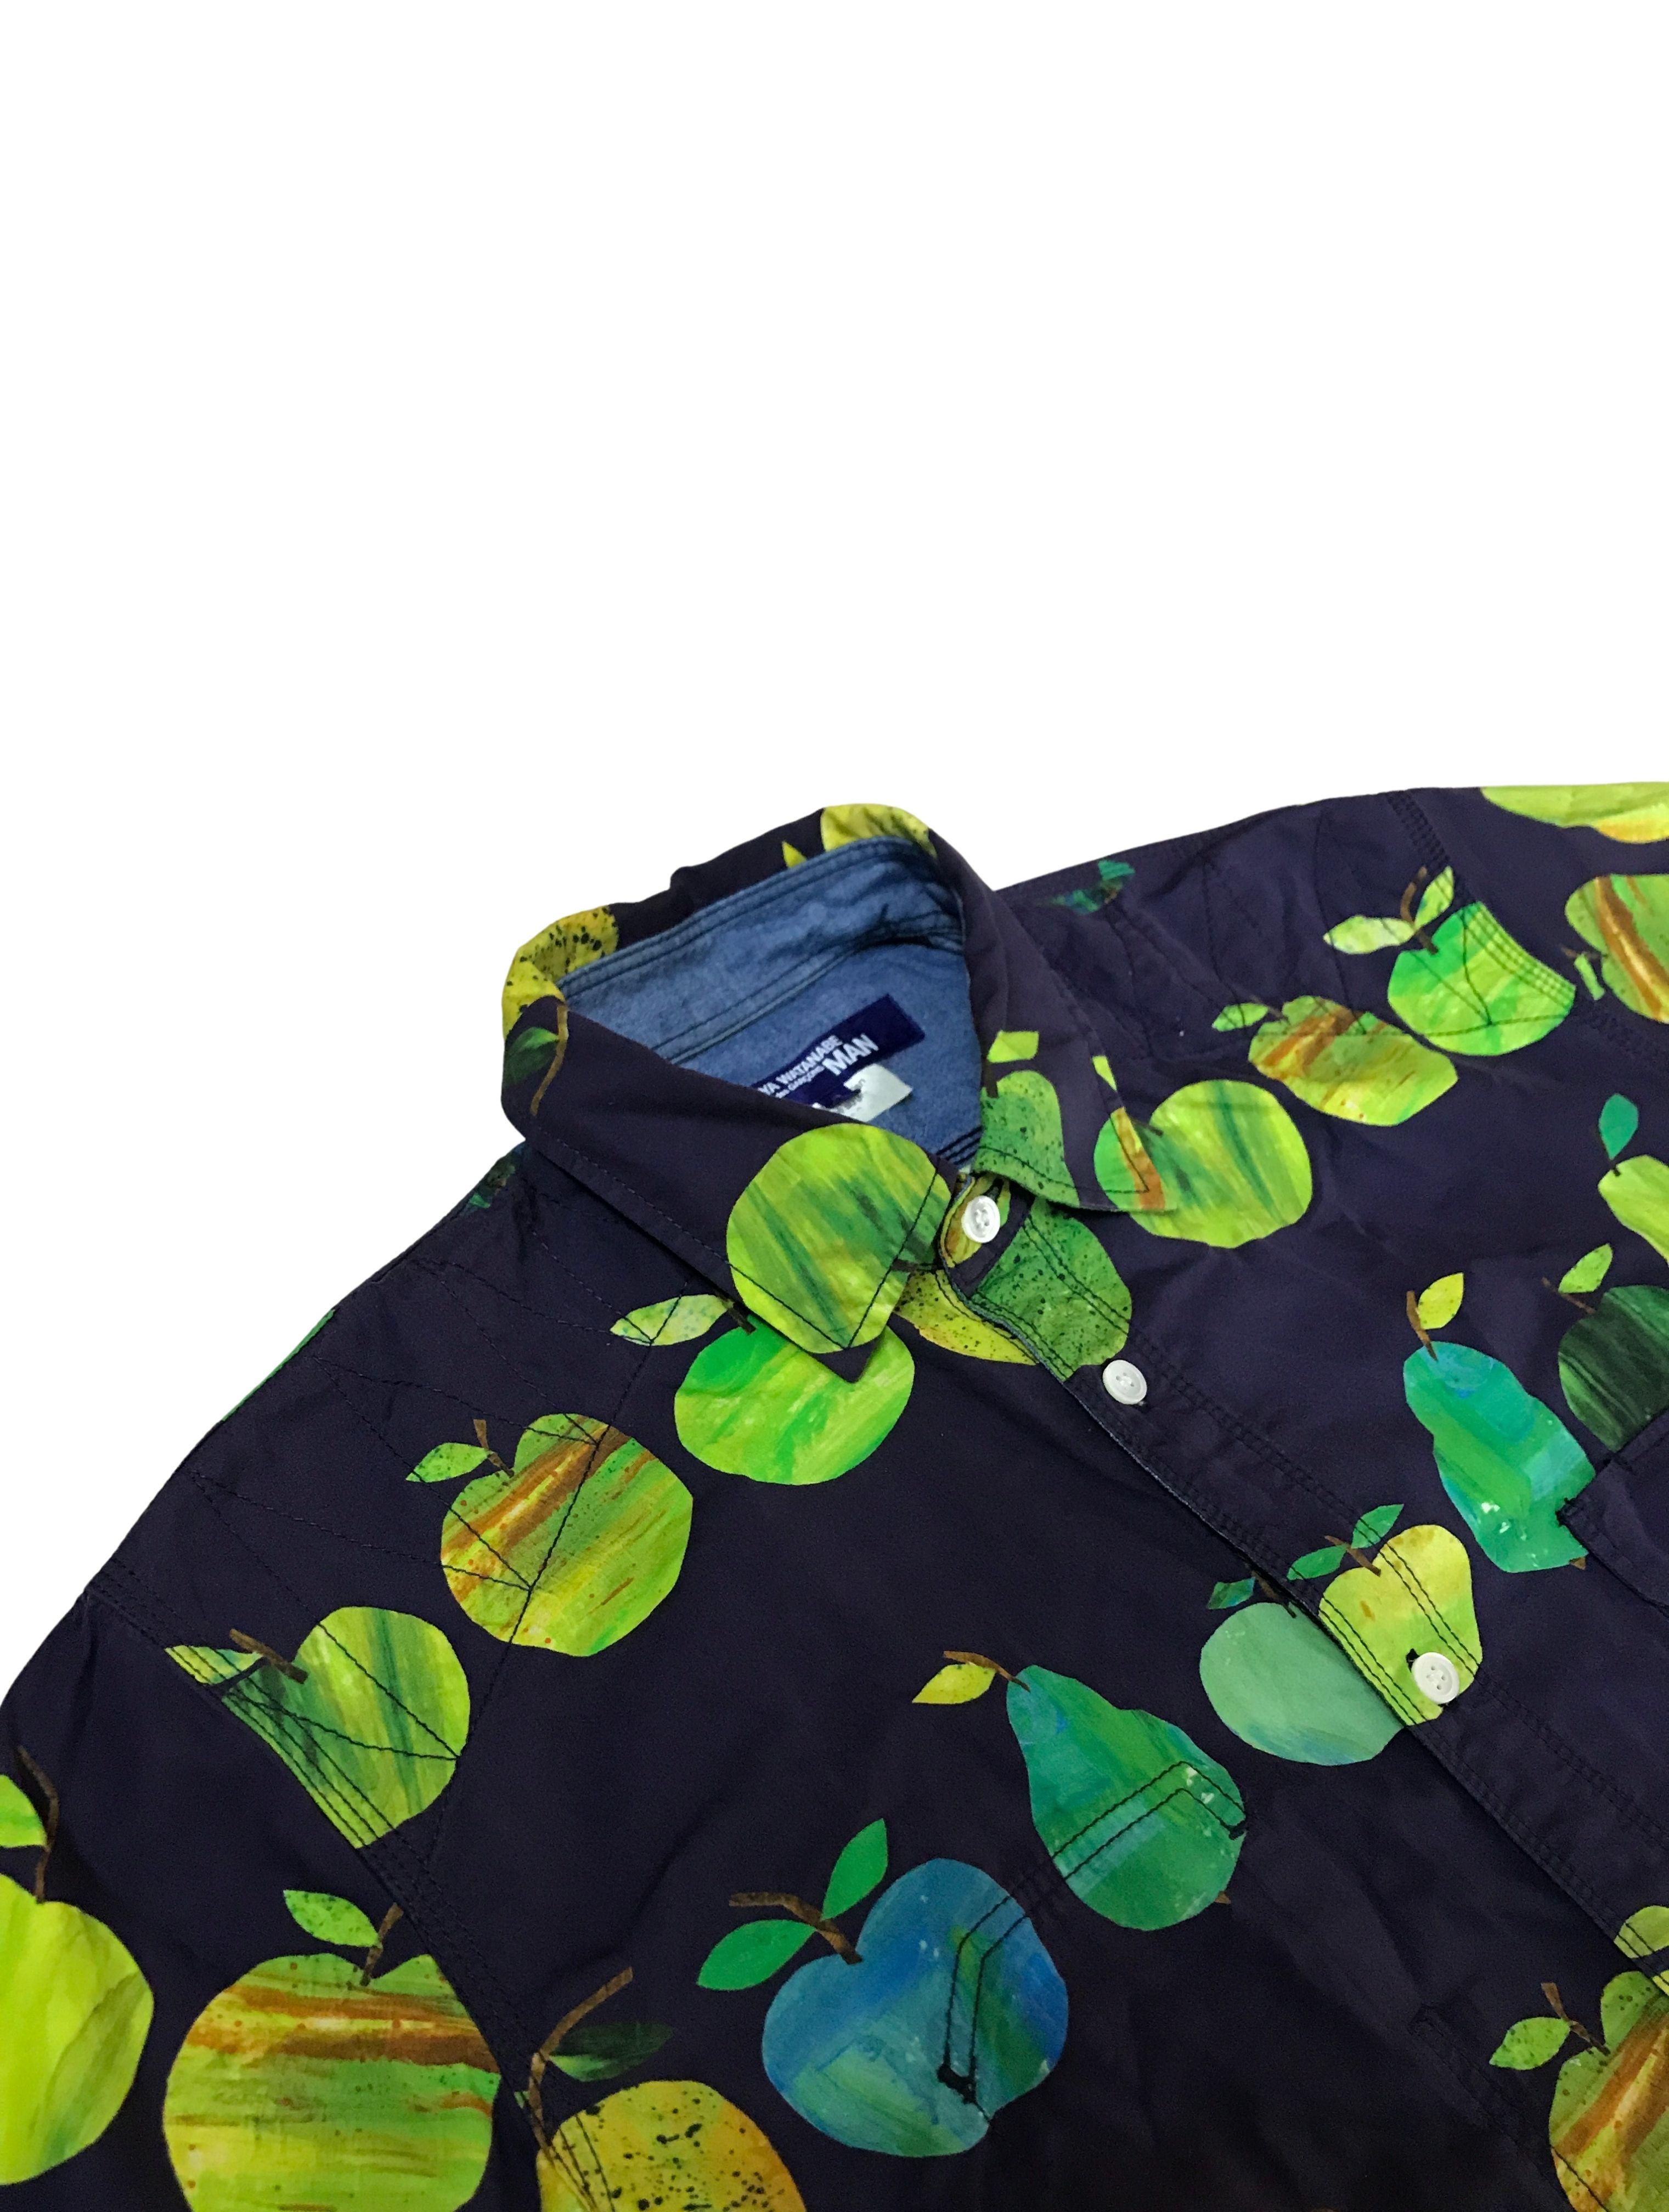 Junya Watanabe MAN Pear Print Shirt, Spring Summer 2019 In Excellent Condition For Sale In Tương Mai Ward, Hoang Mai District